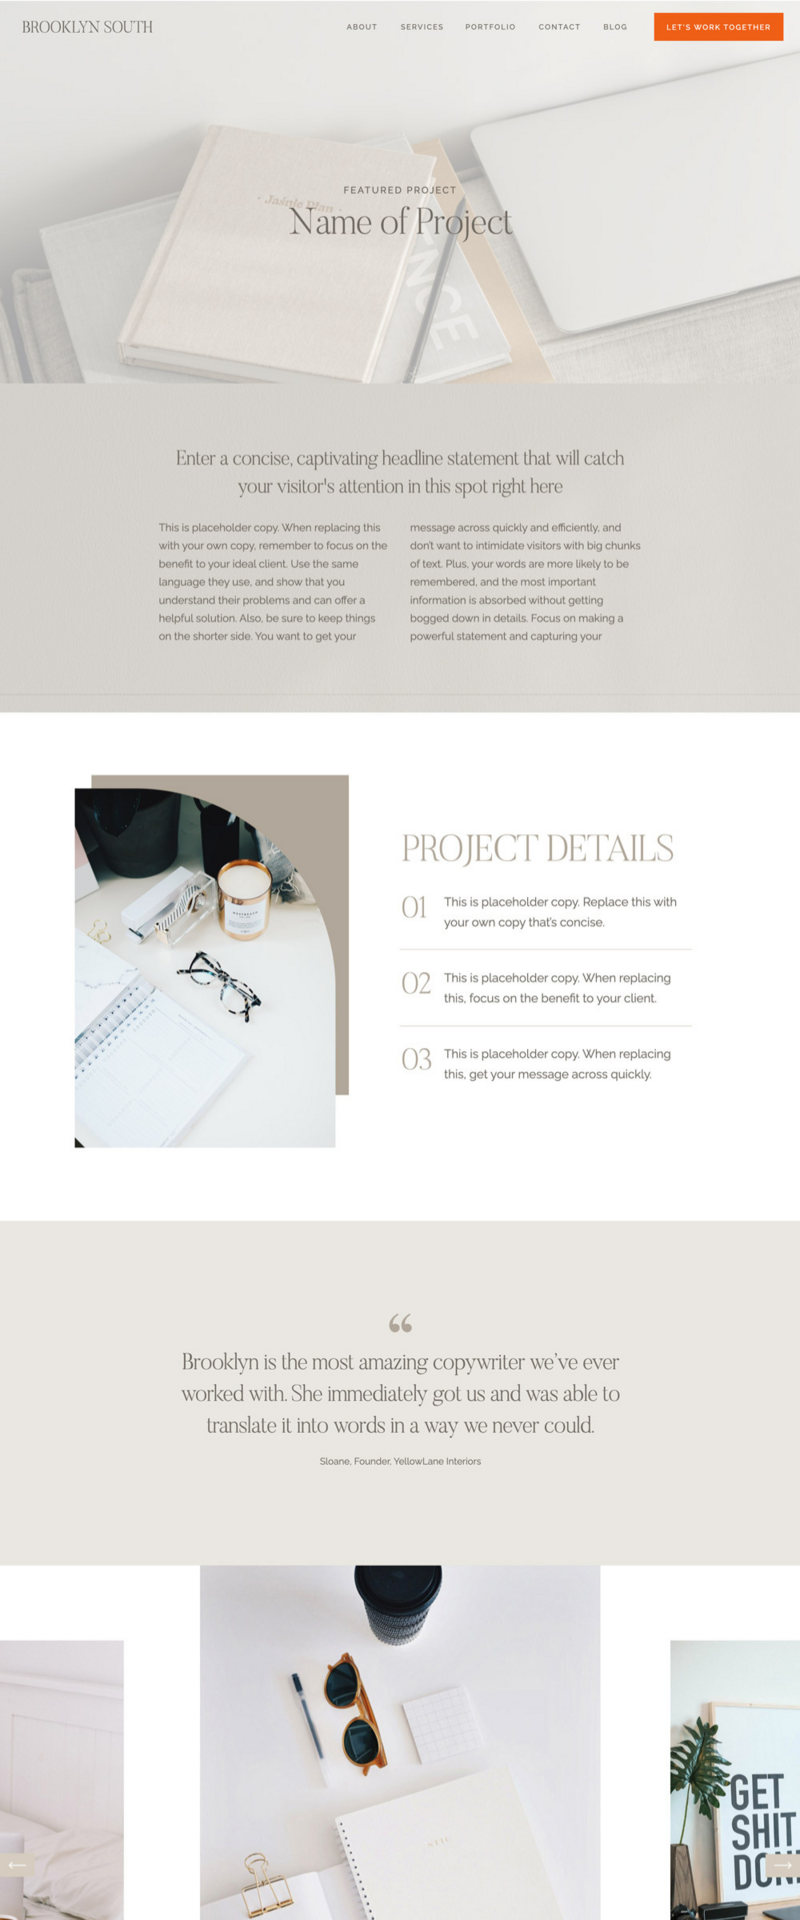 showit_template_for_creative_service_providers_-_brooklyn_south_7